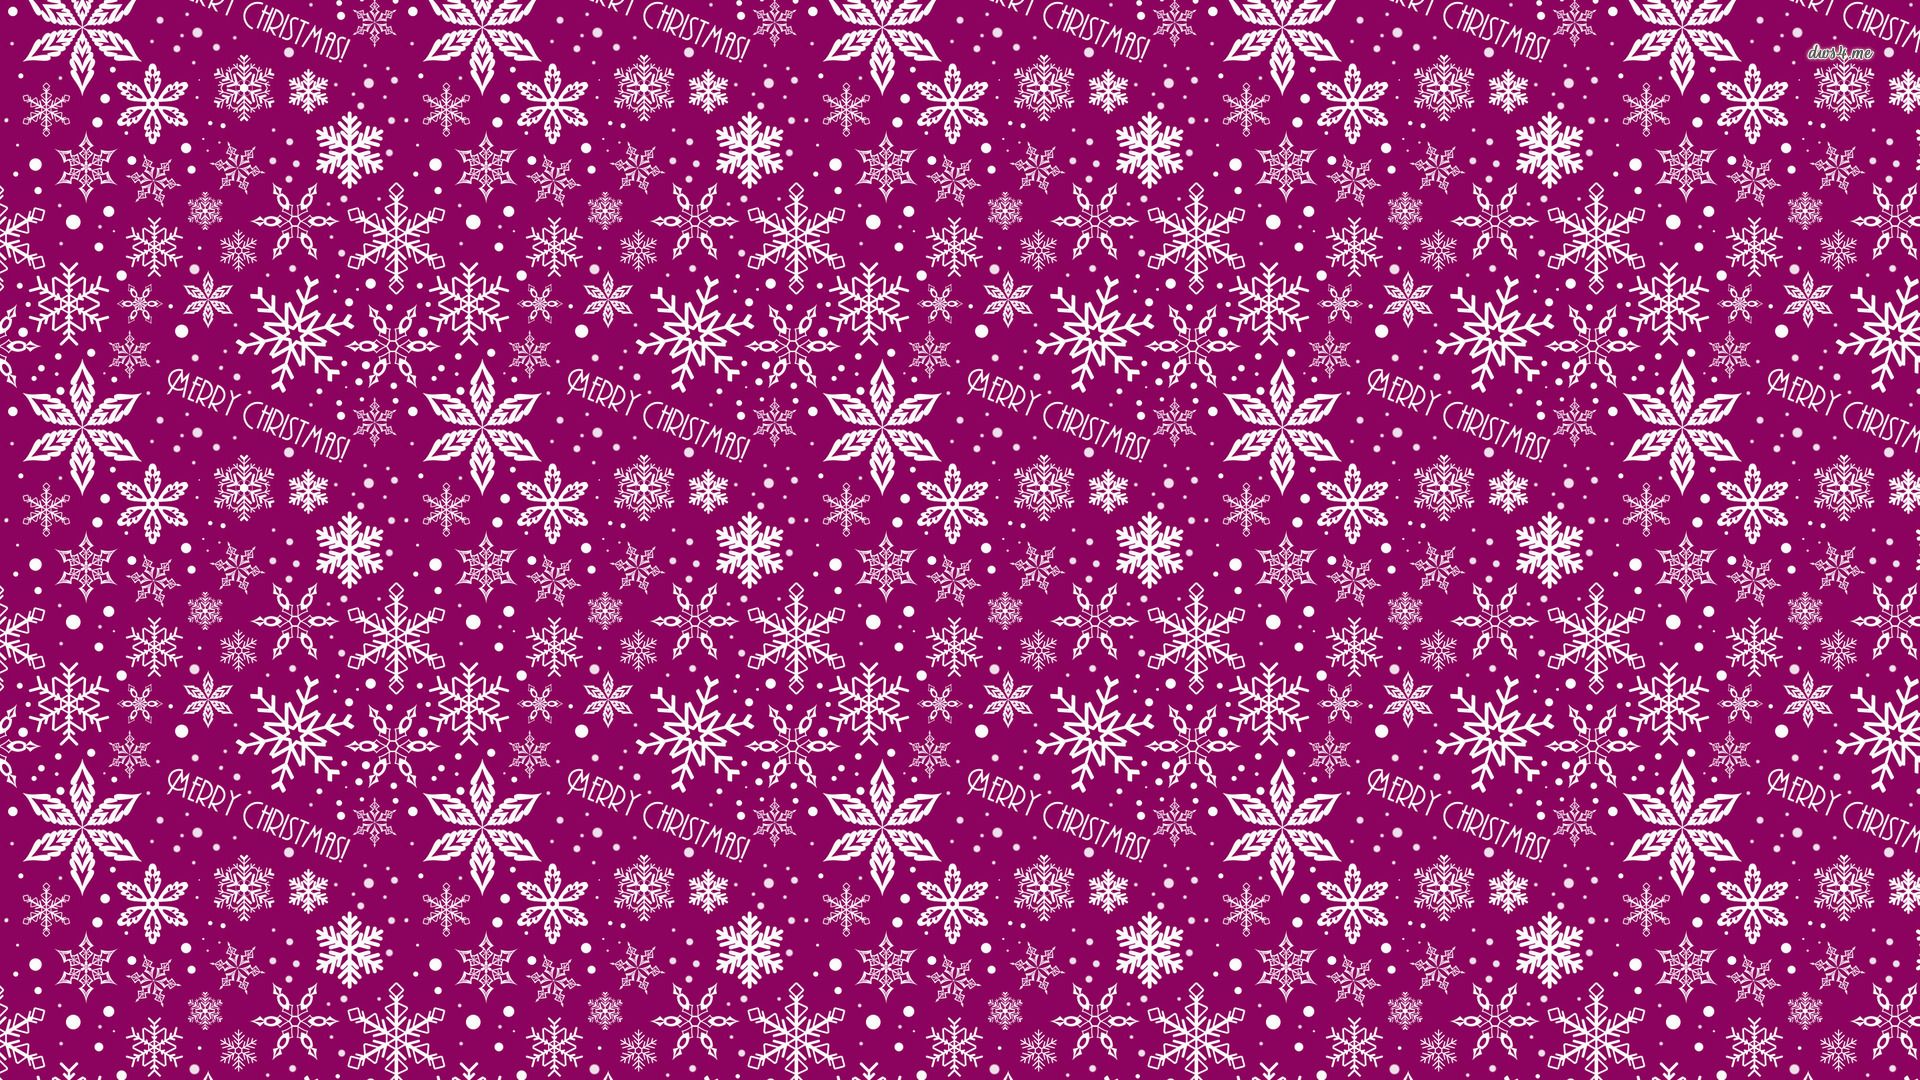 Great Christmas Wallpaper Sites Images Christmas Pattern - Christmas Pattern Wallpaper Hd - HD Wallpaper 